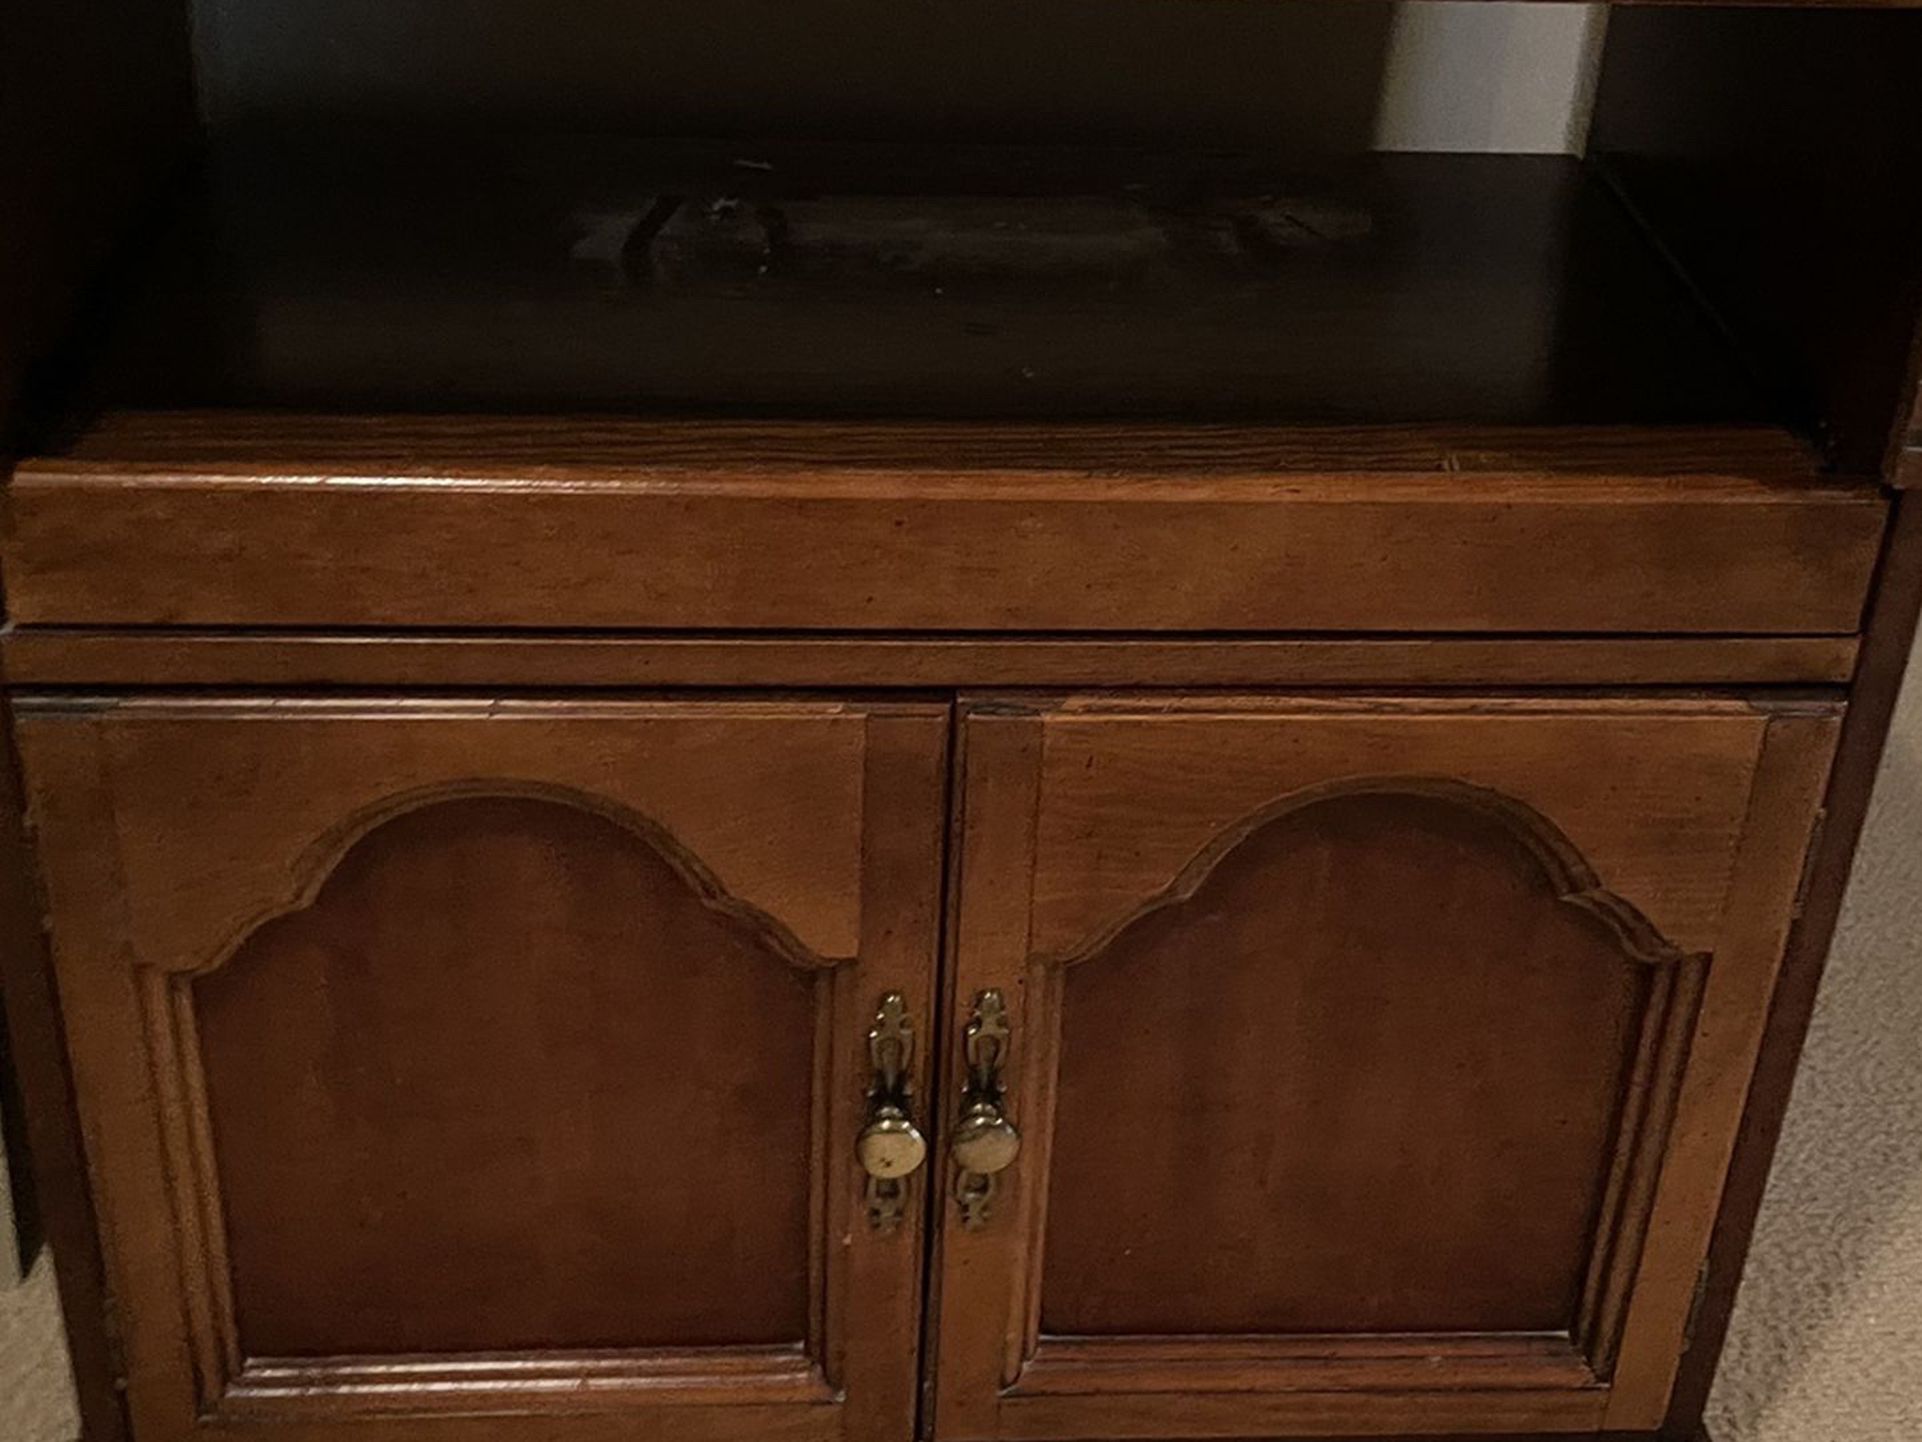 TV Stand Cabinet